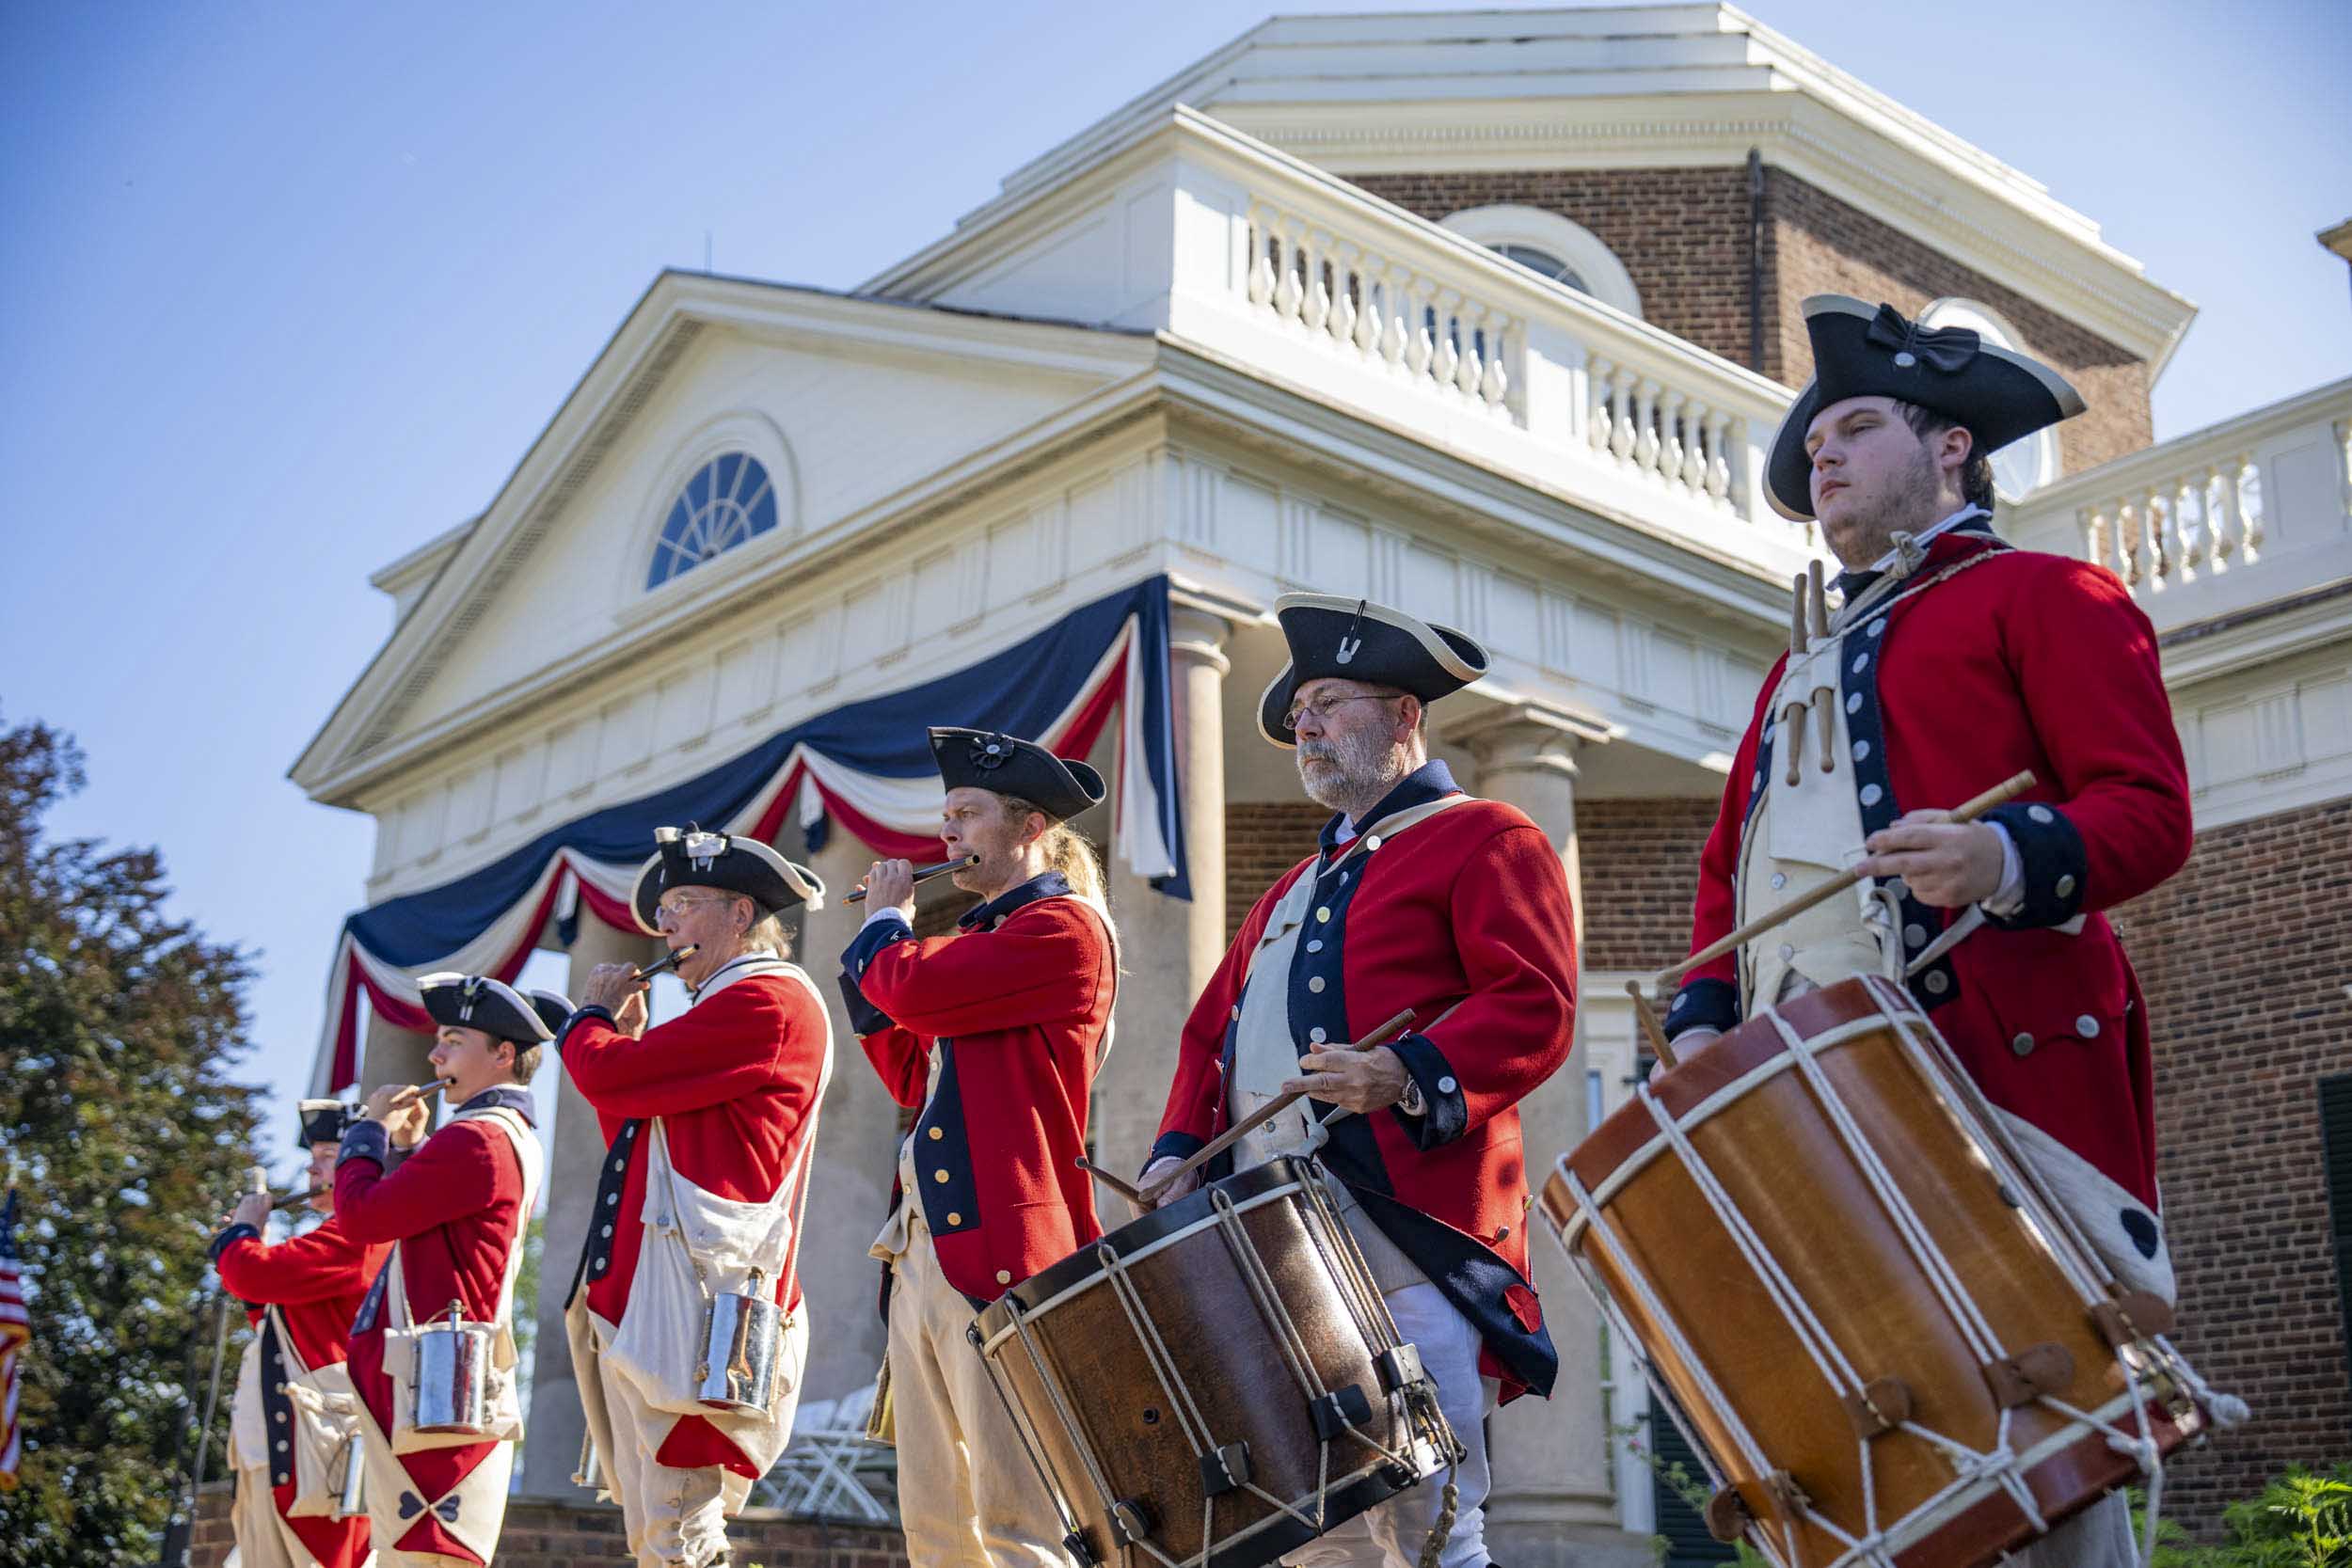 Fife and drummers in colonial red uniforms playing their instruments in front of Monticello.